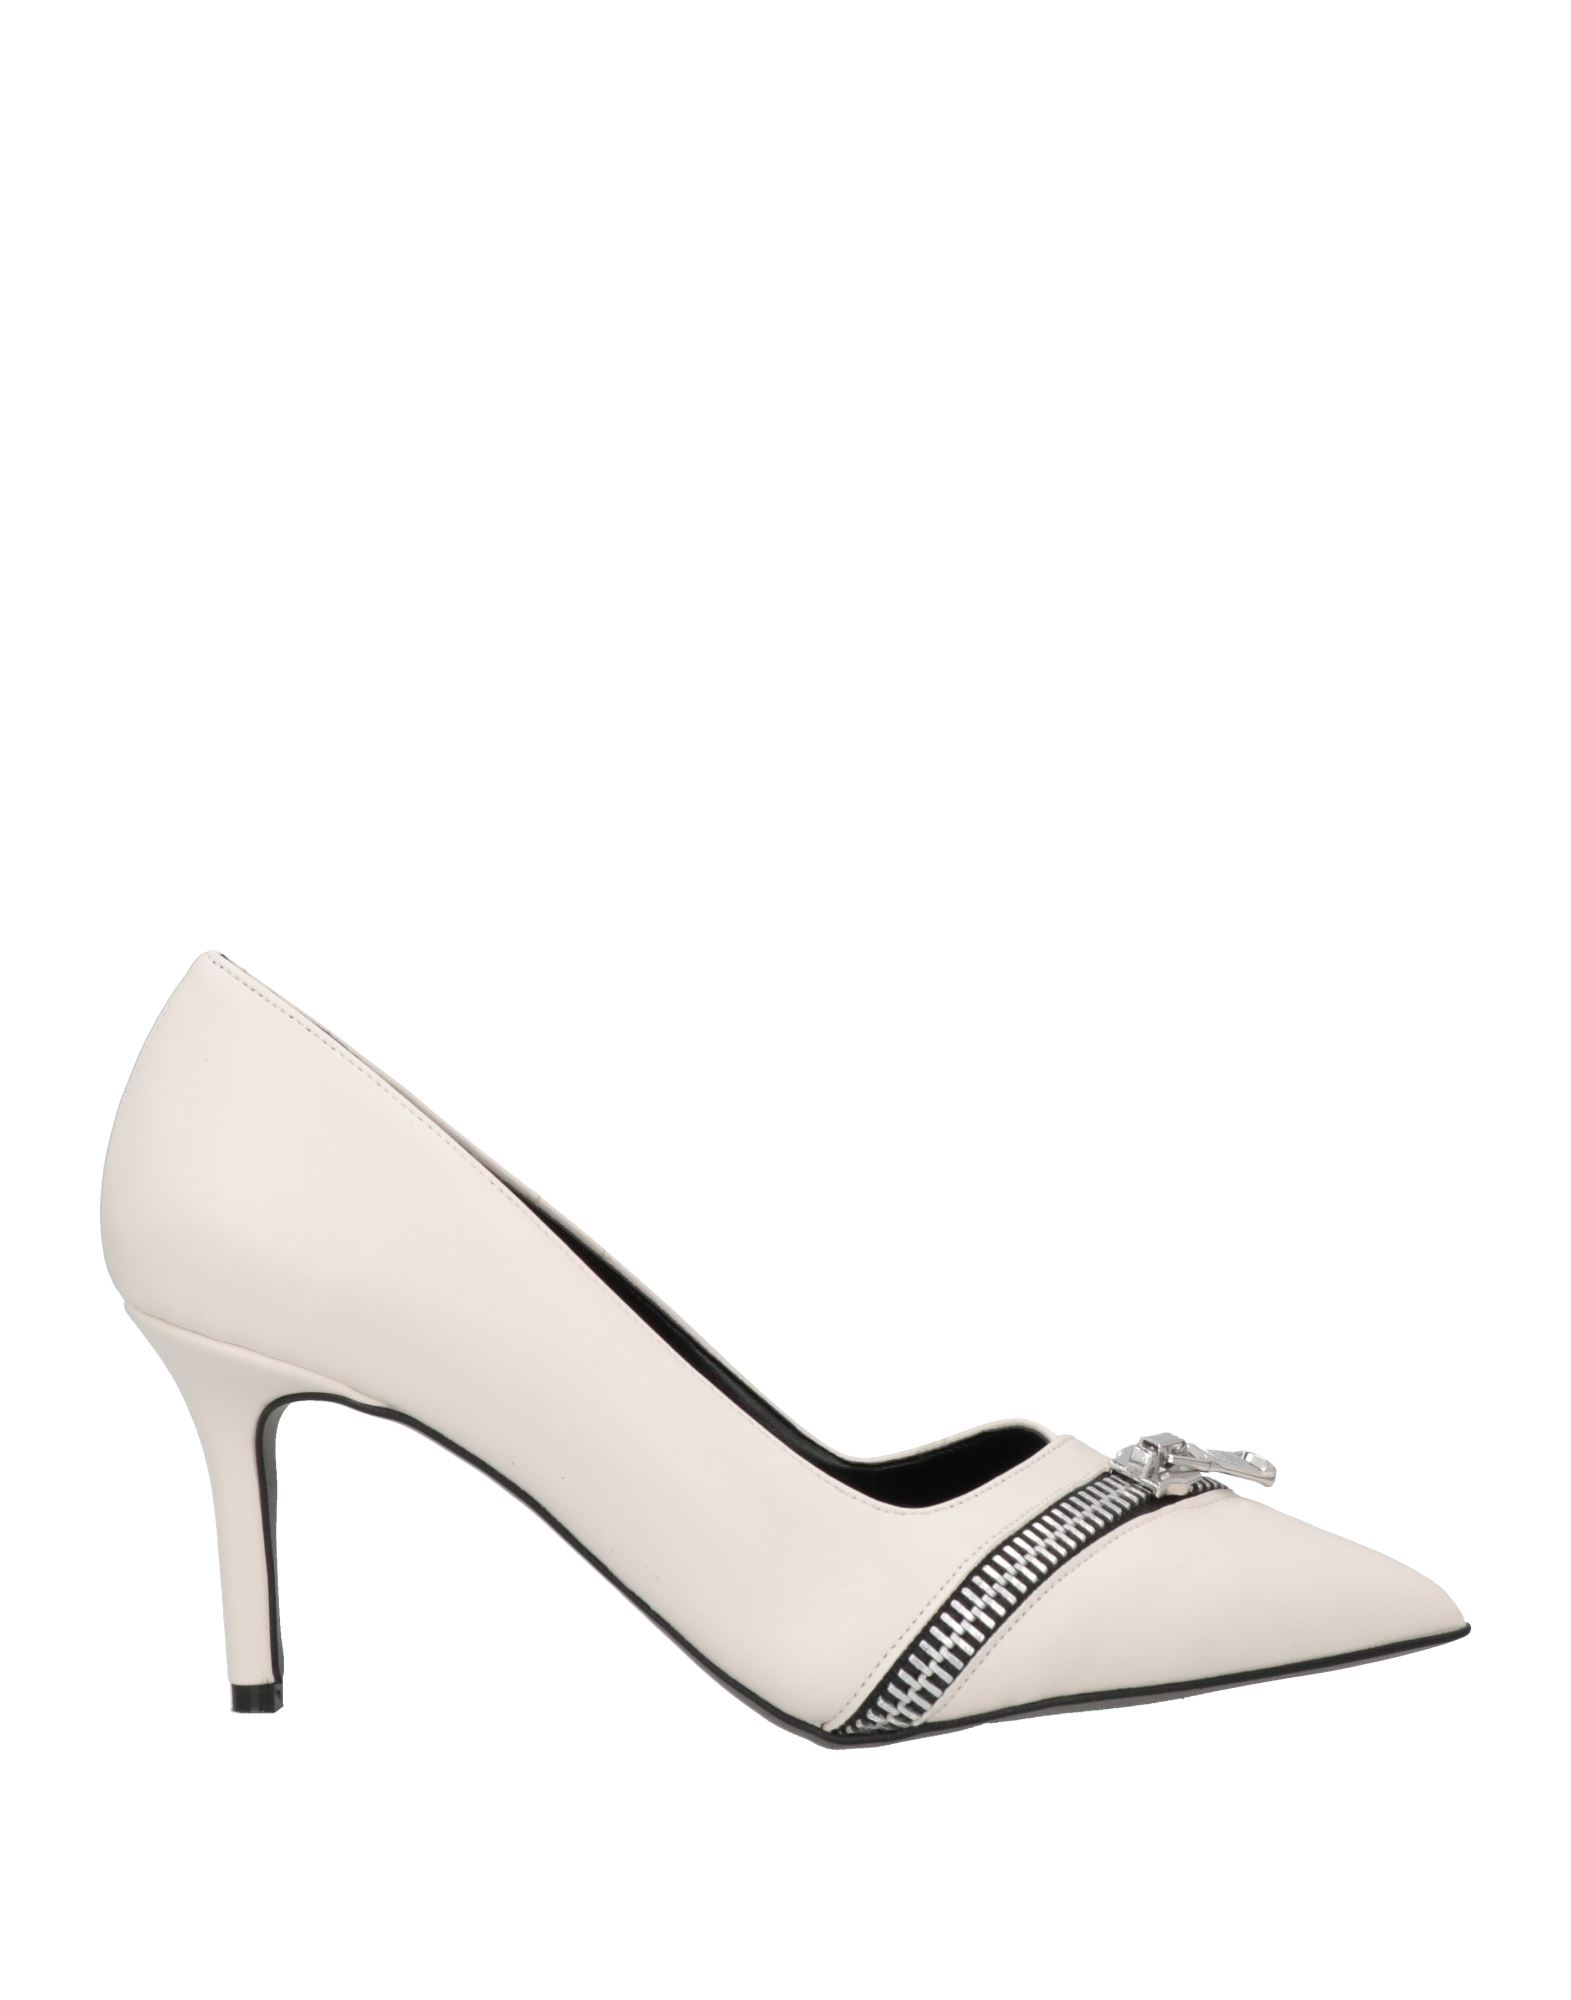 Islo Isabella Lorusso Pumps In Off White